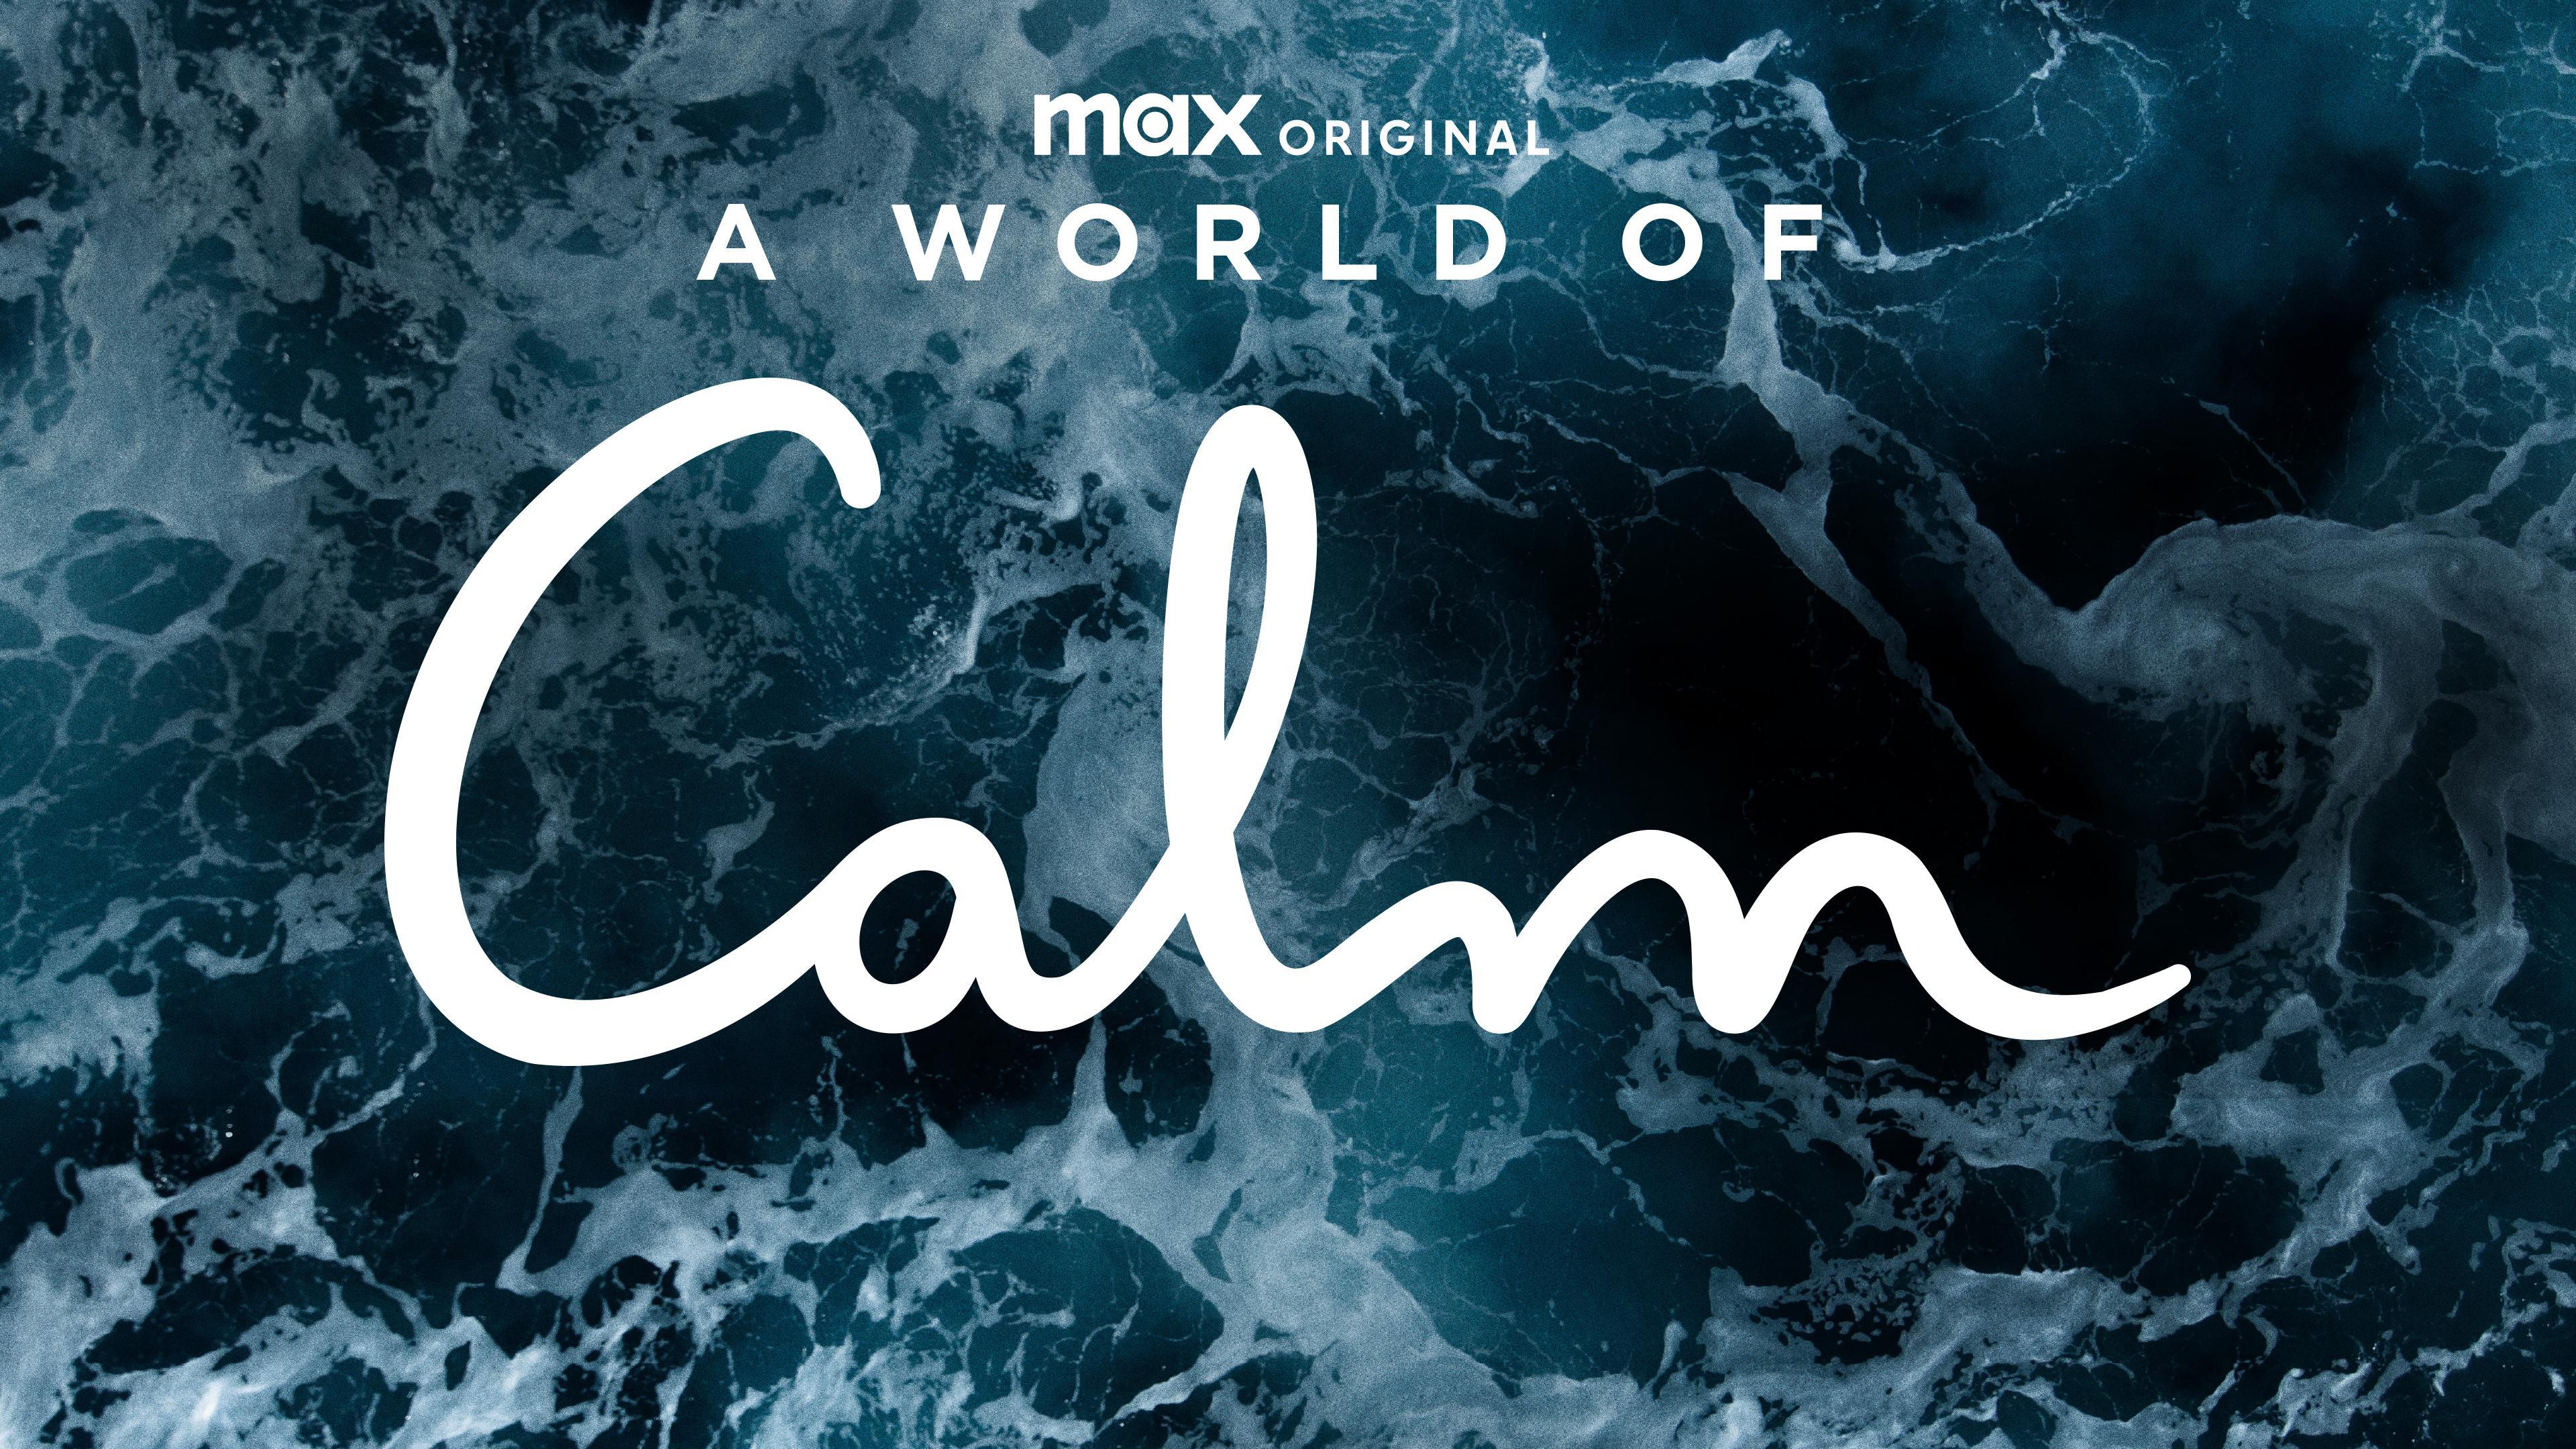 HBO Max Meets Troubled Times With 'A World of Calm' Series - Media Play News